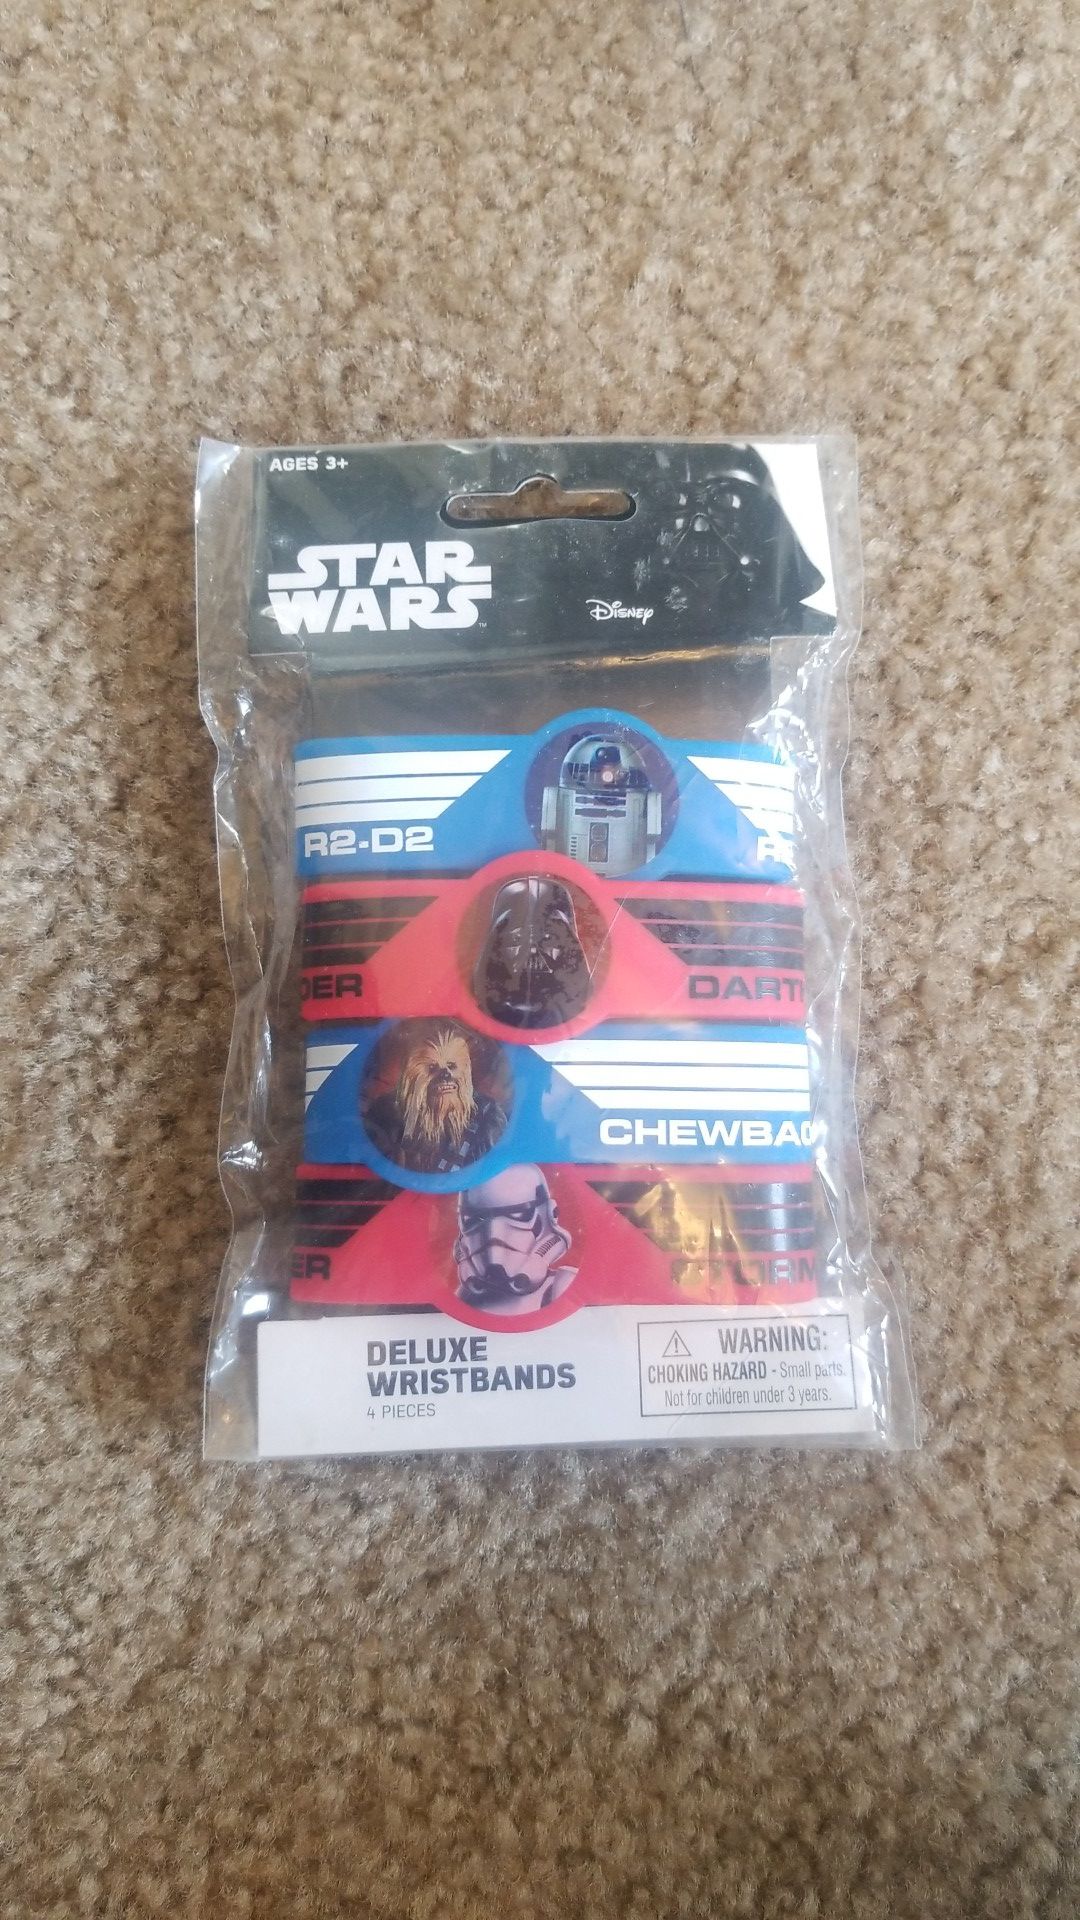 Star wars deluxe wristbands